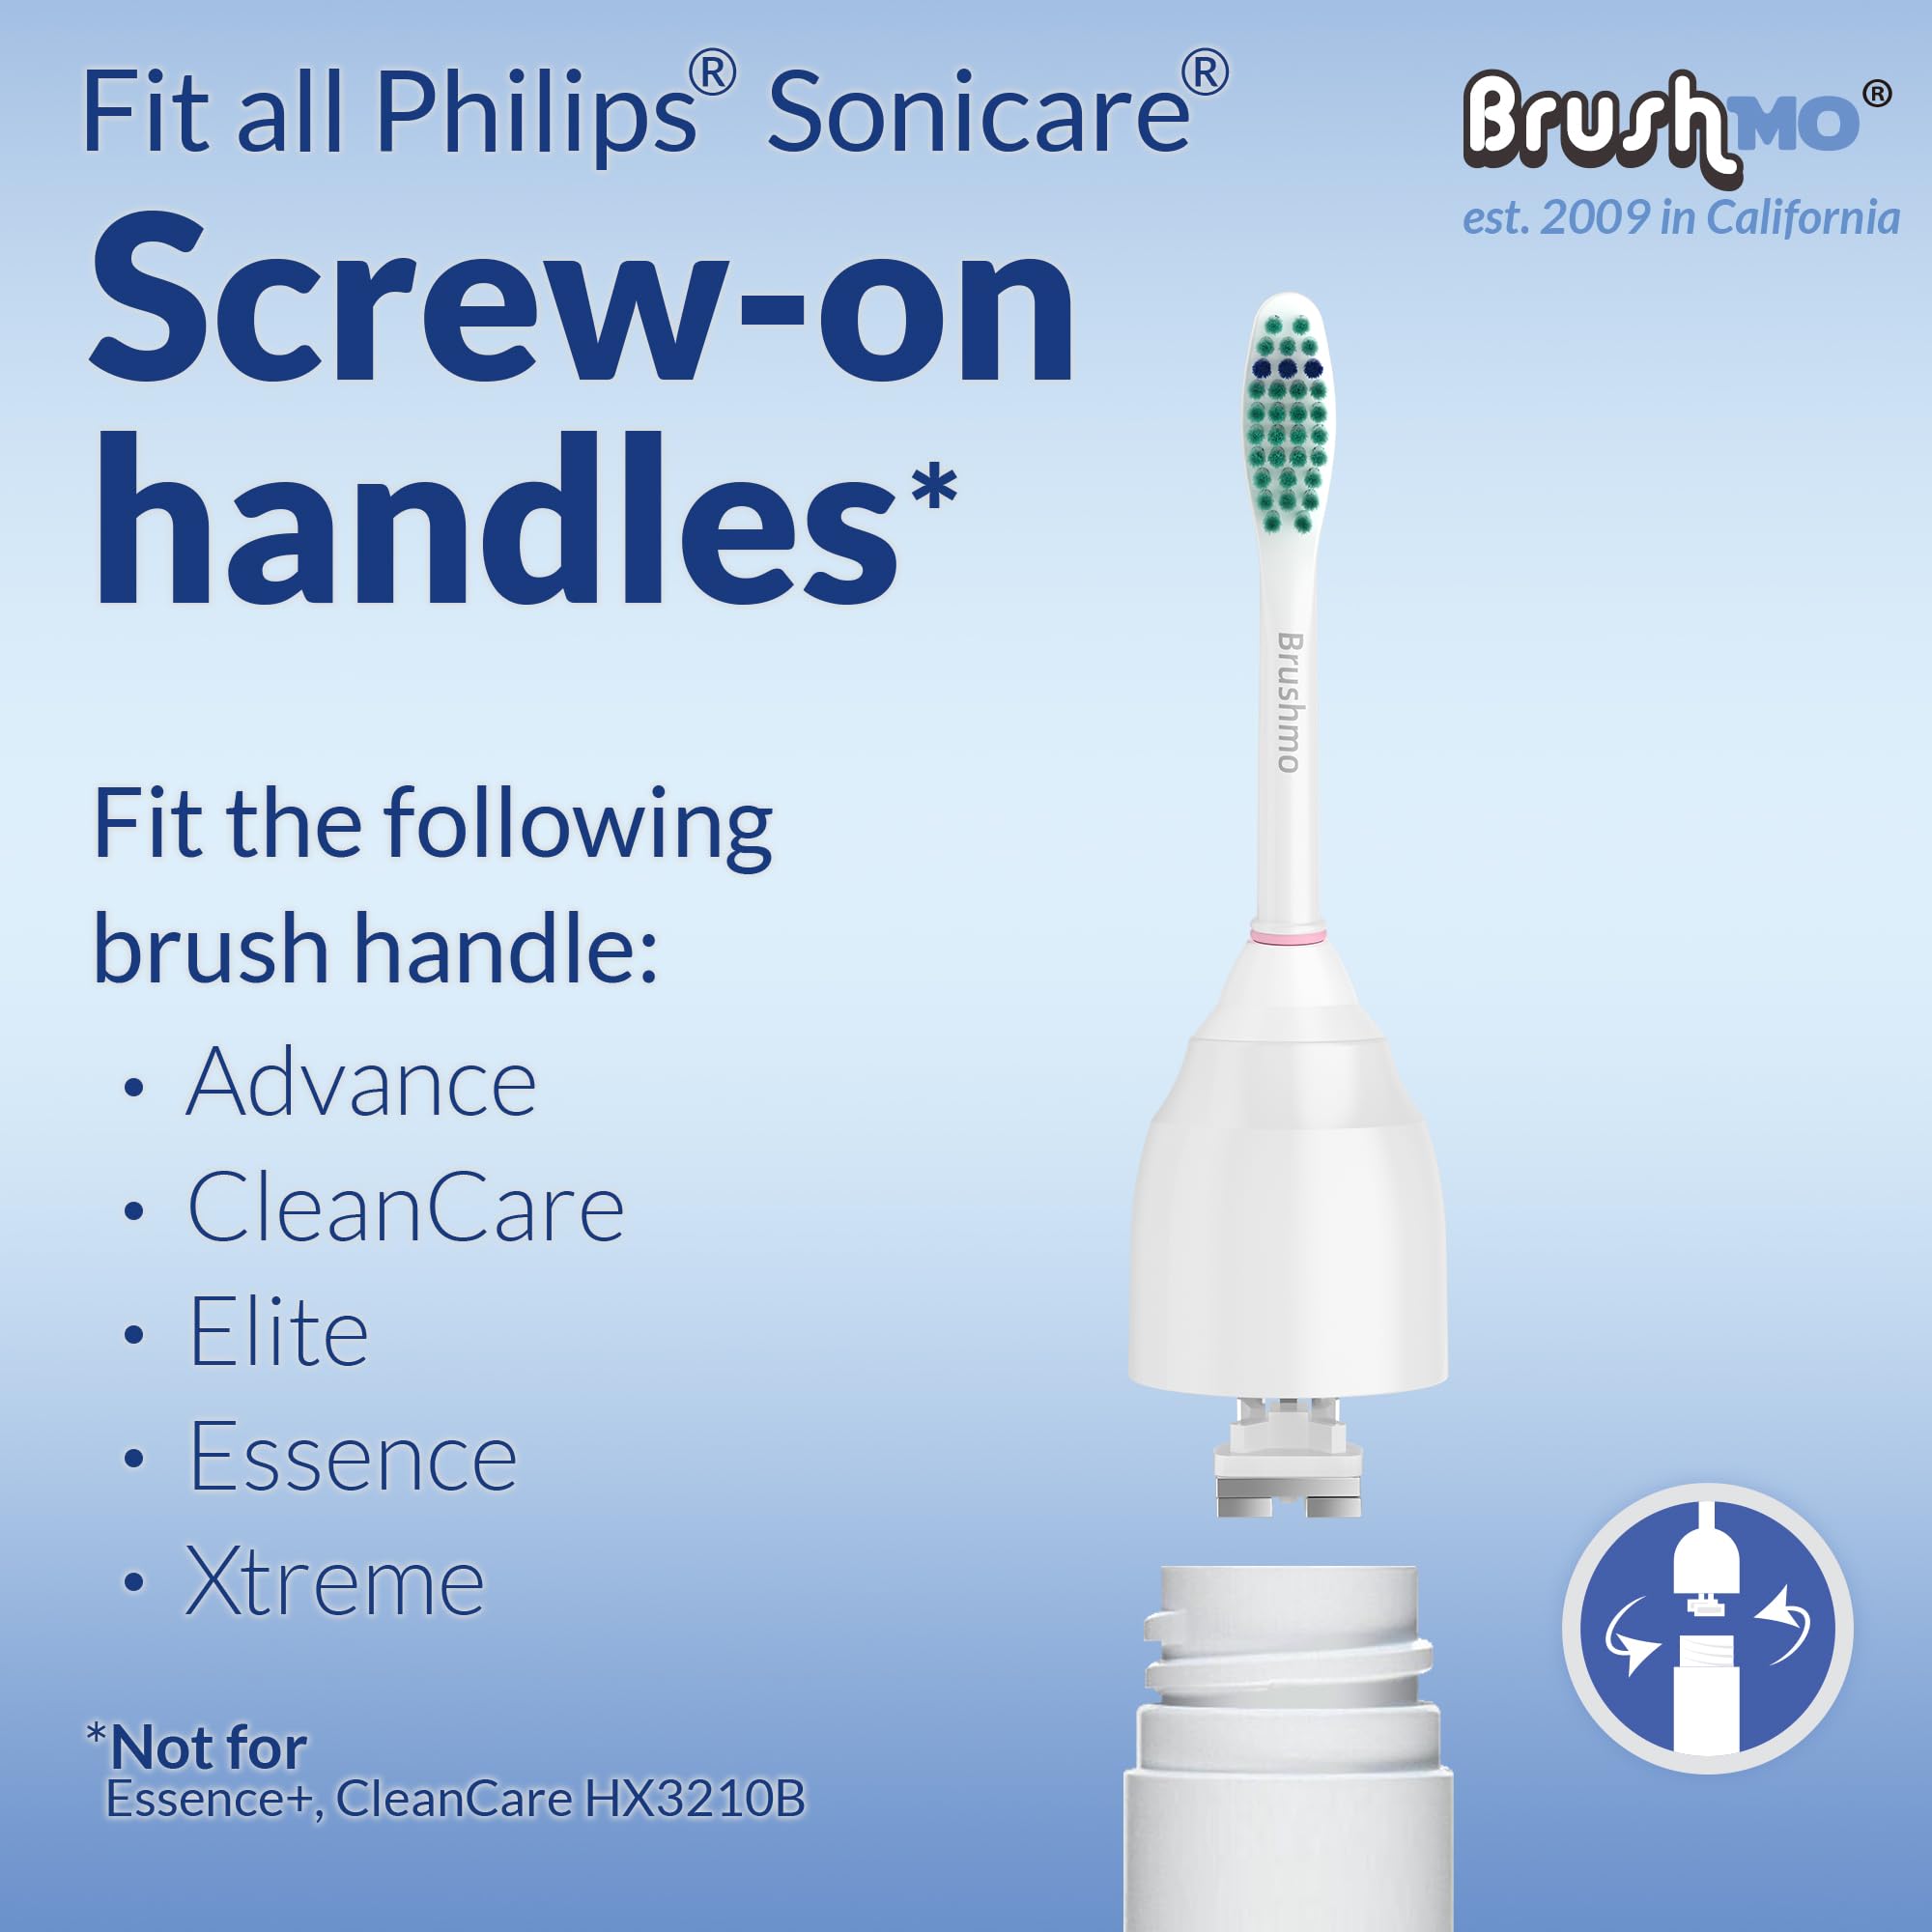 Replacement Toothbrush Heads for Philips Sonicare E-Series HX7022/66, 6 Pack, Fits Sonicare Essence, Xtreme, Elite, Advance, and CleanCare Electric Toothbrush with Hygienic caps by Brushmo